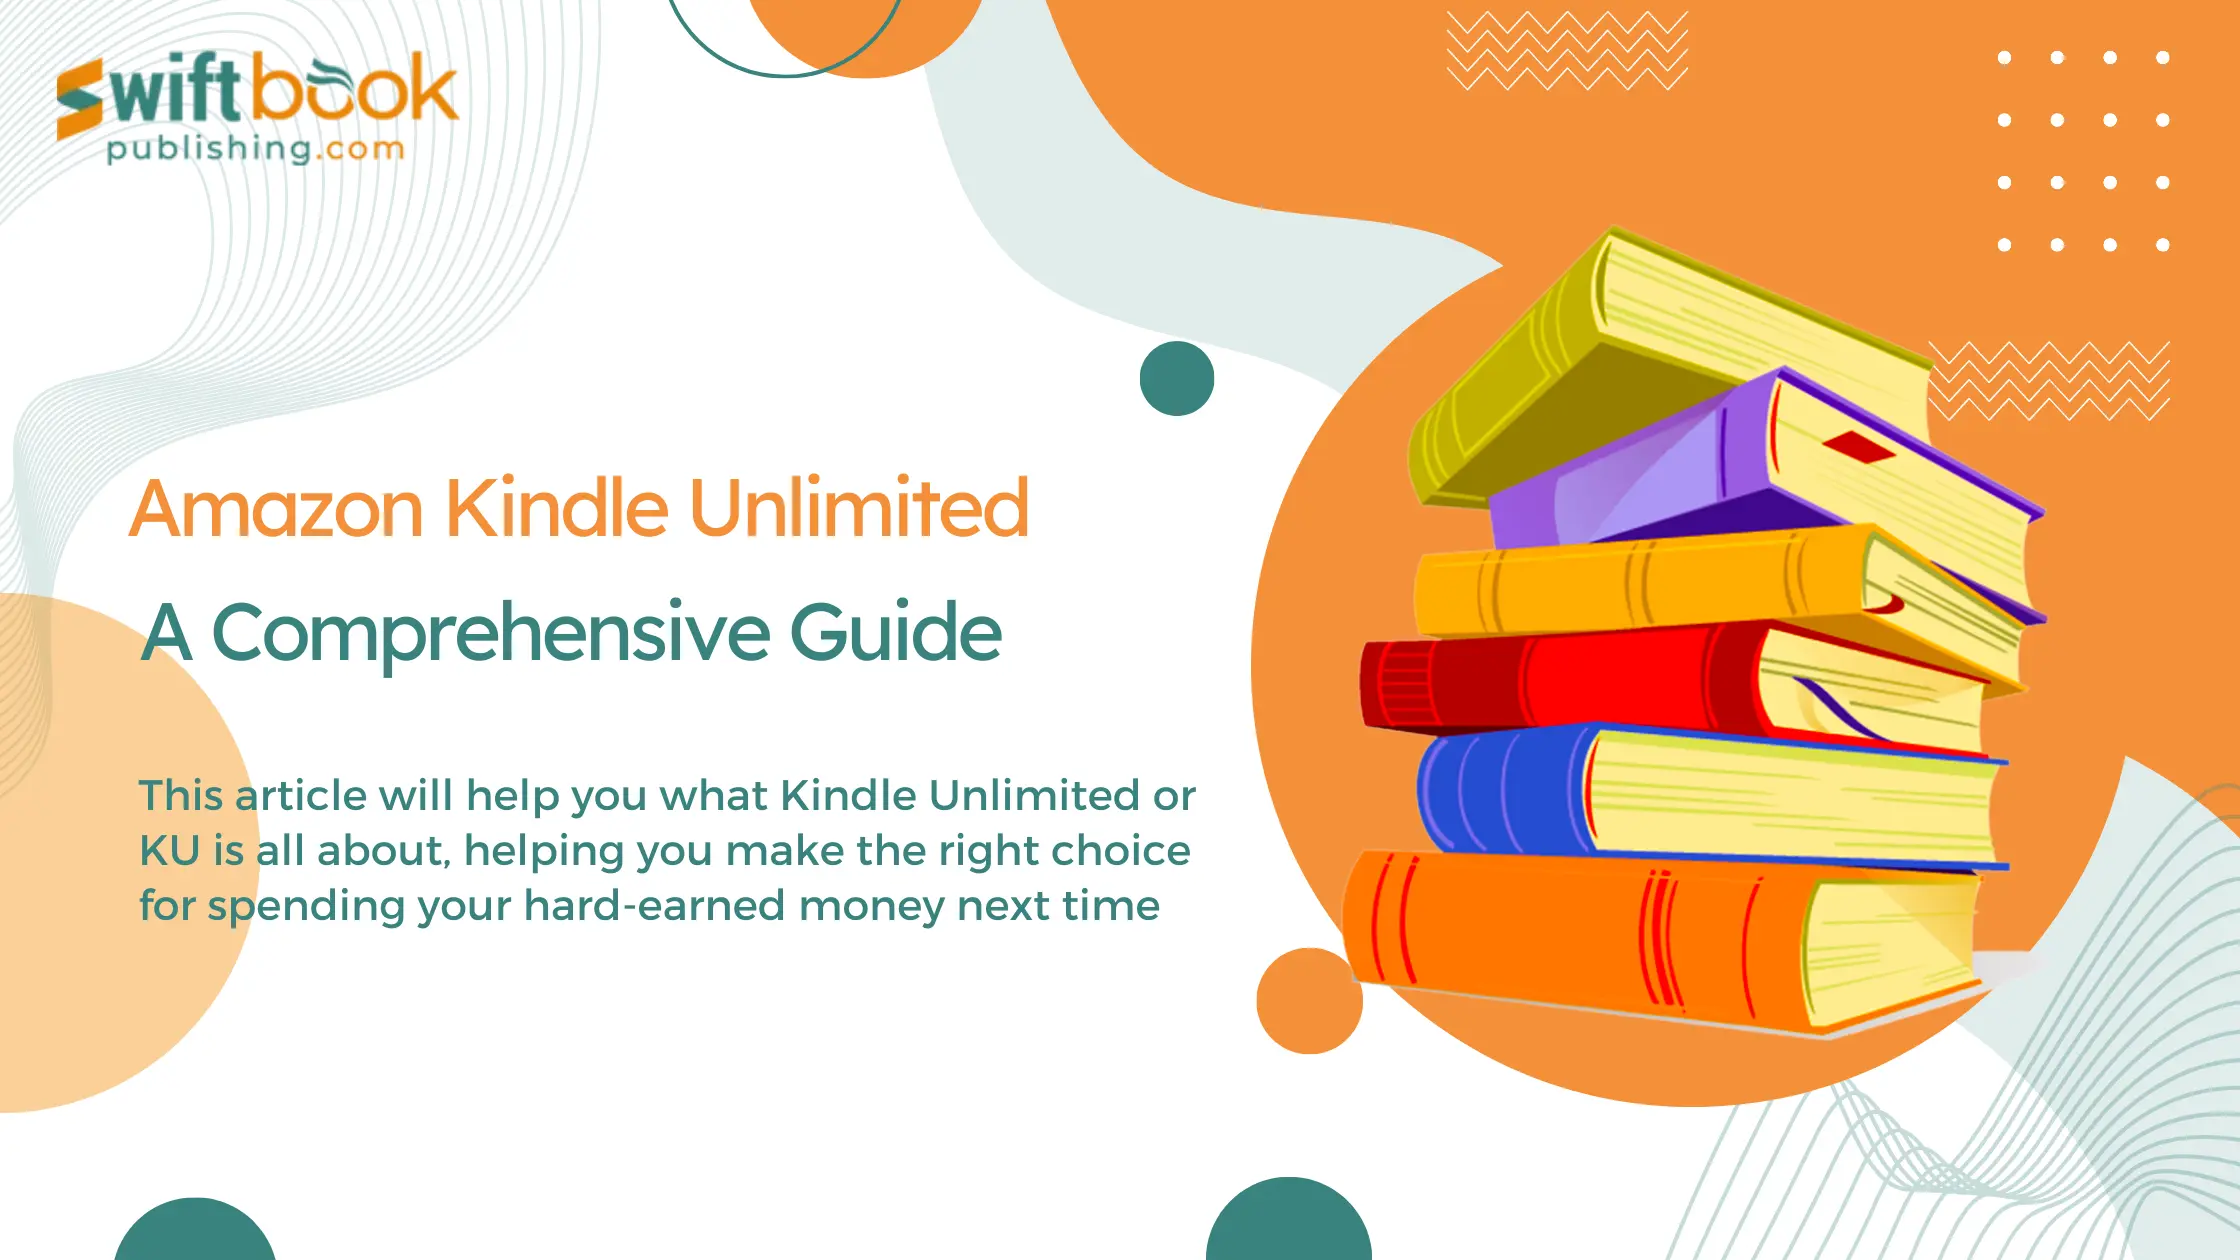 A Comprehensive Guide For Kindle Unlimited